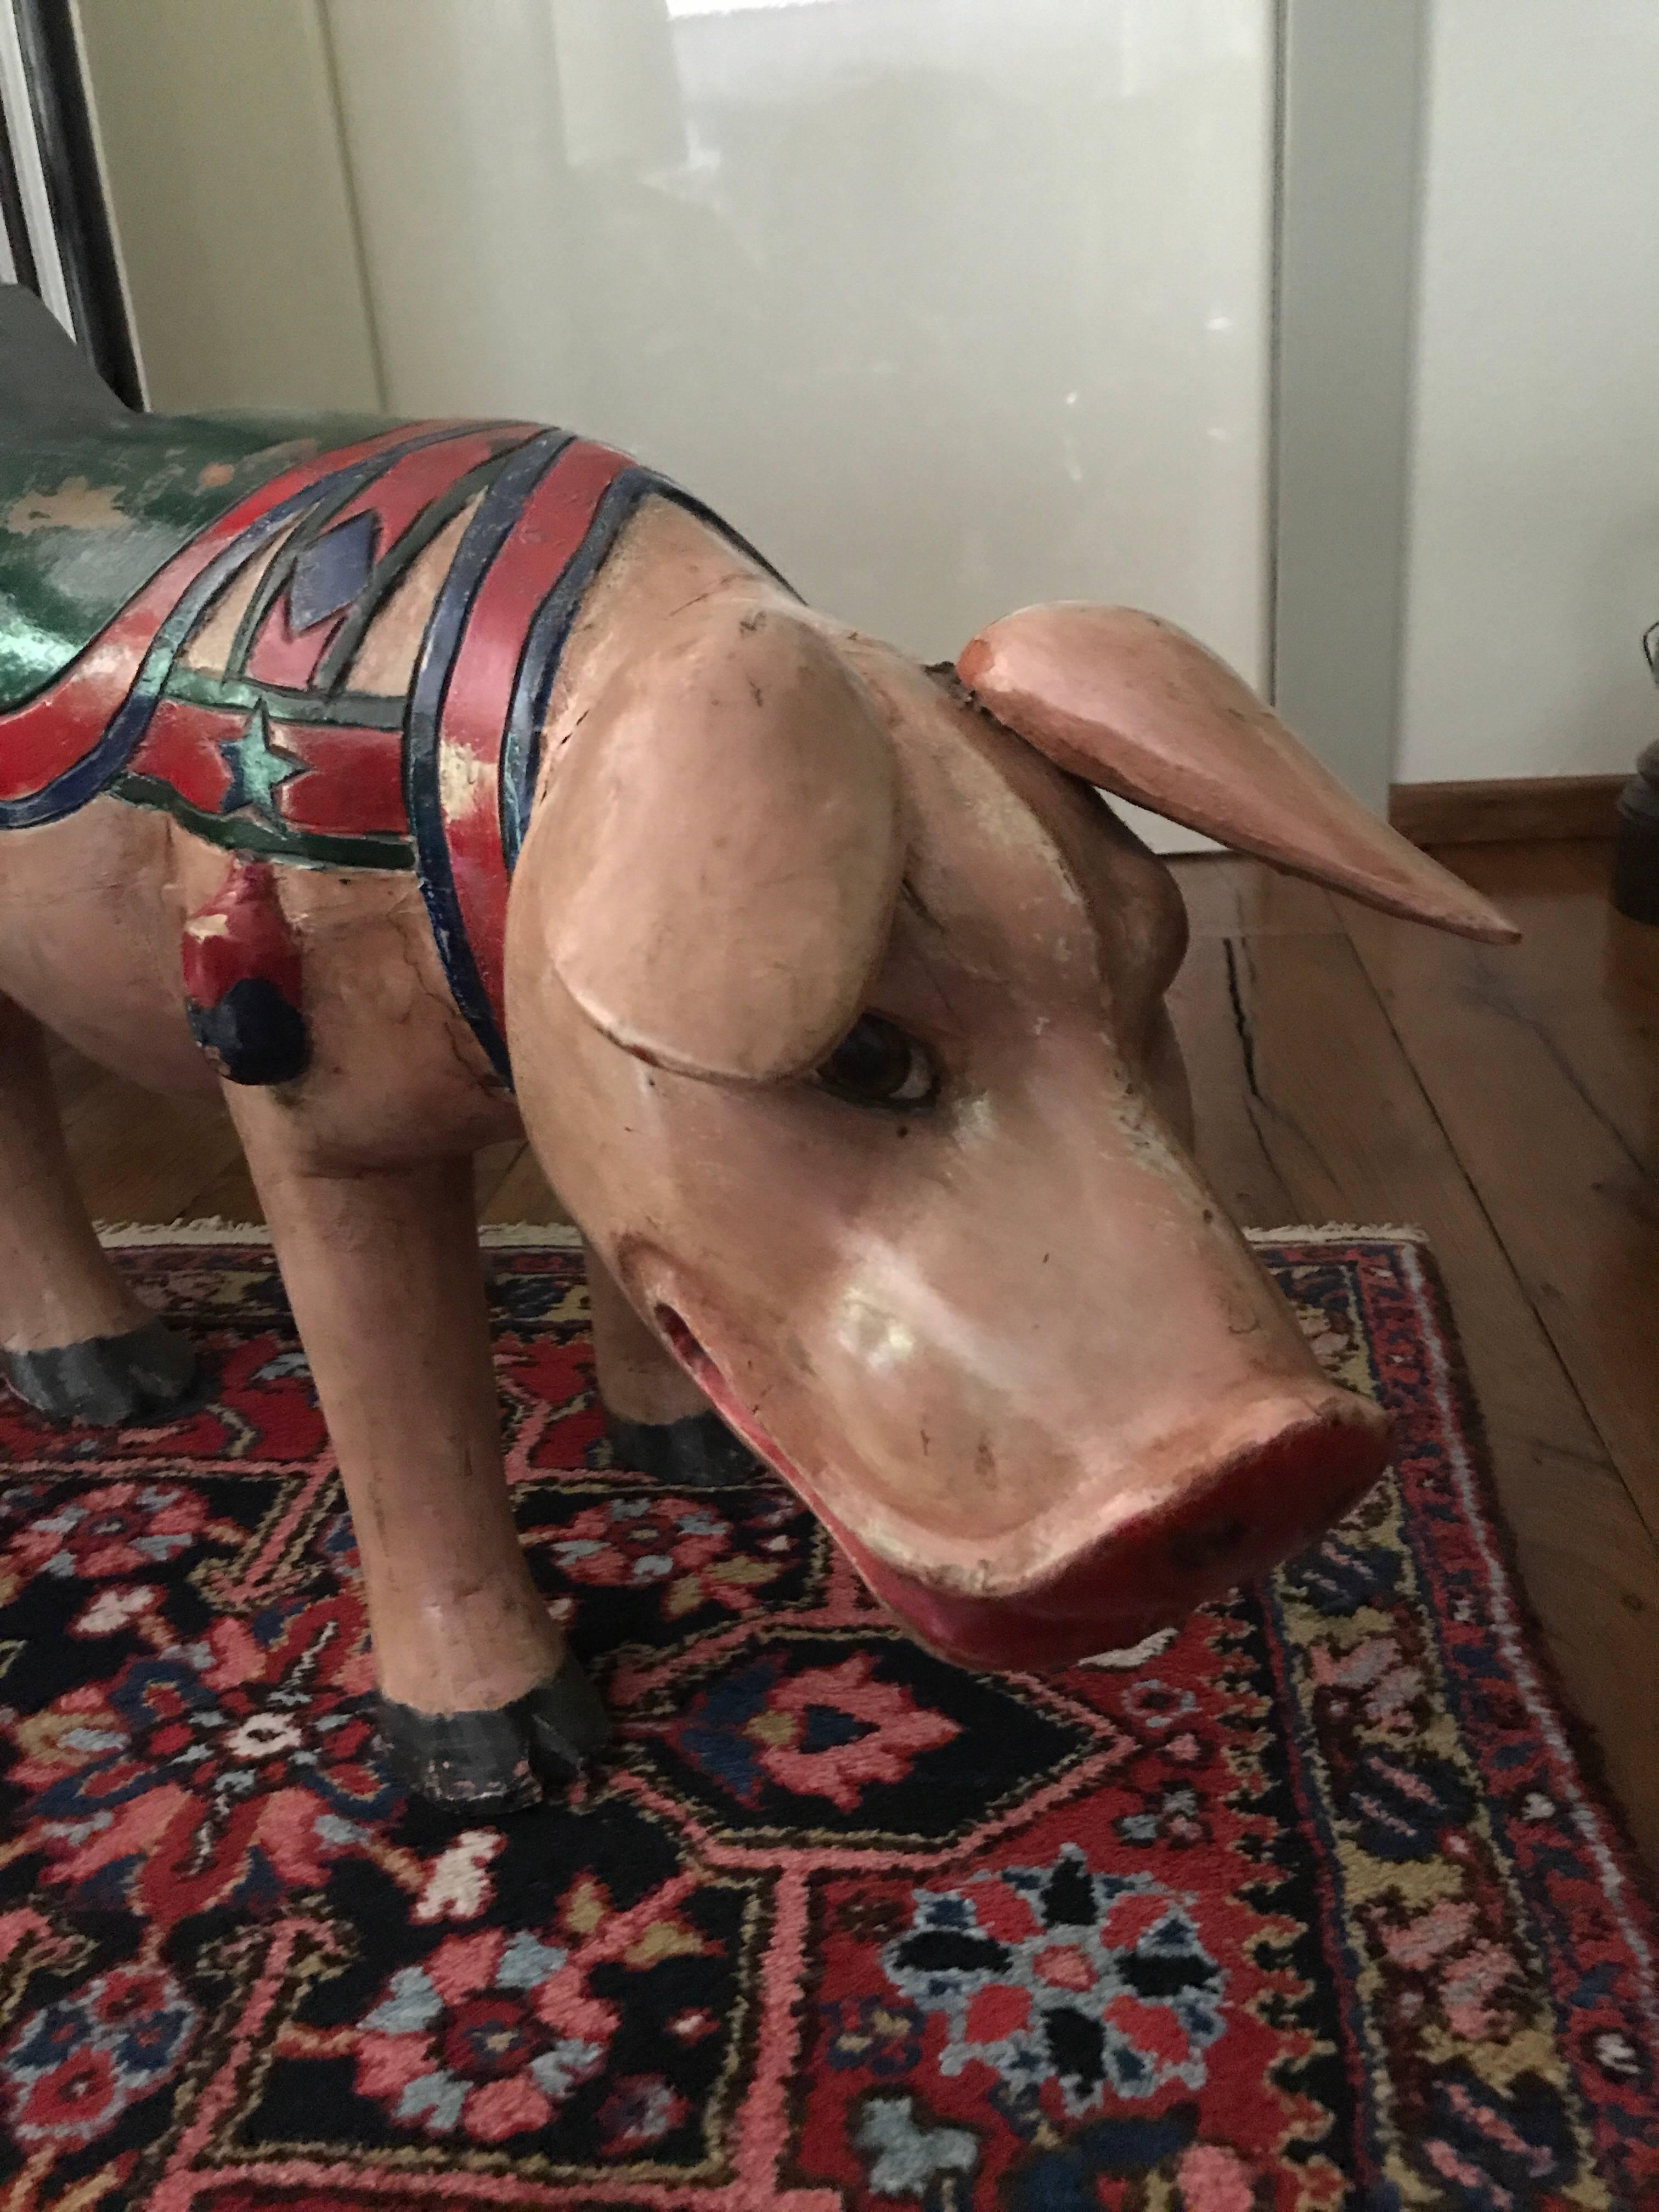 Late Victorian Fairmill Pig Second of a Pair “1900” Extremely Rare one of two